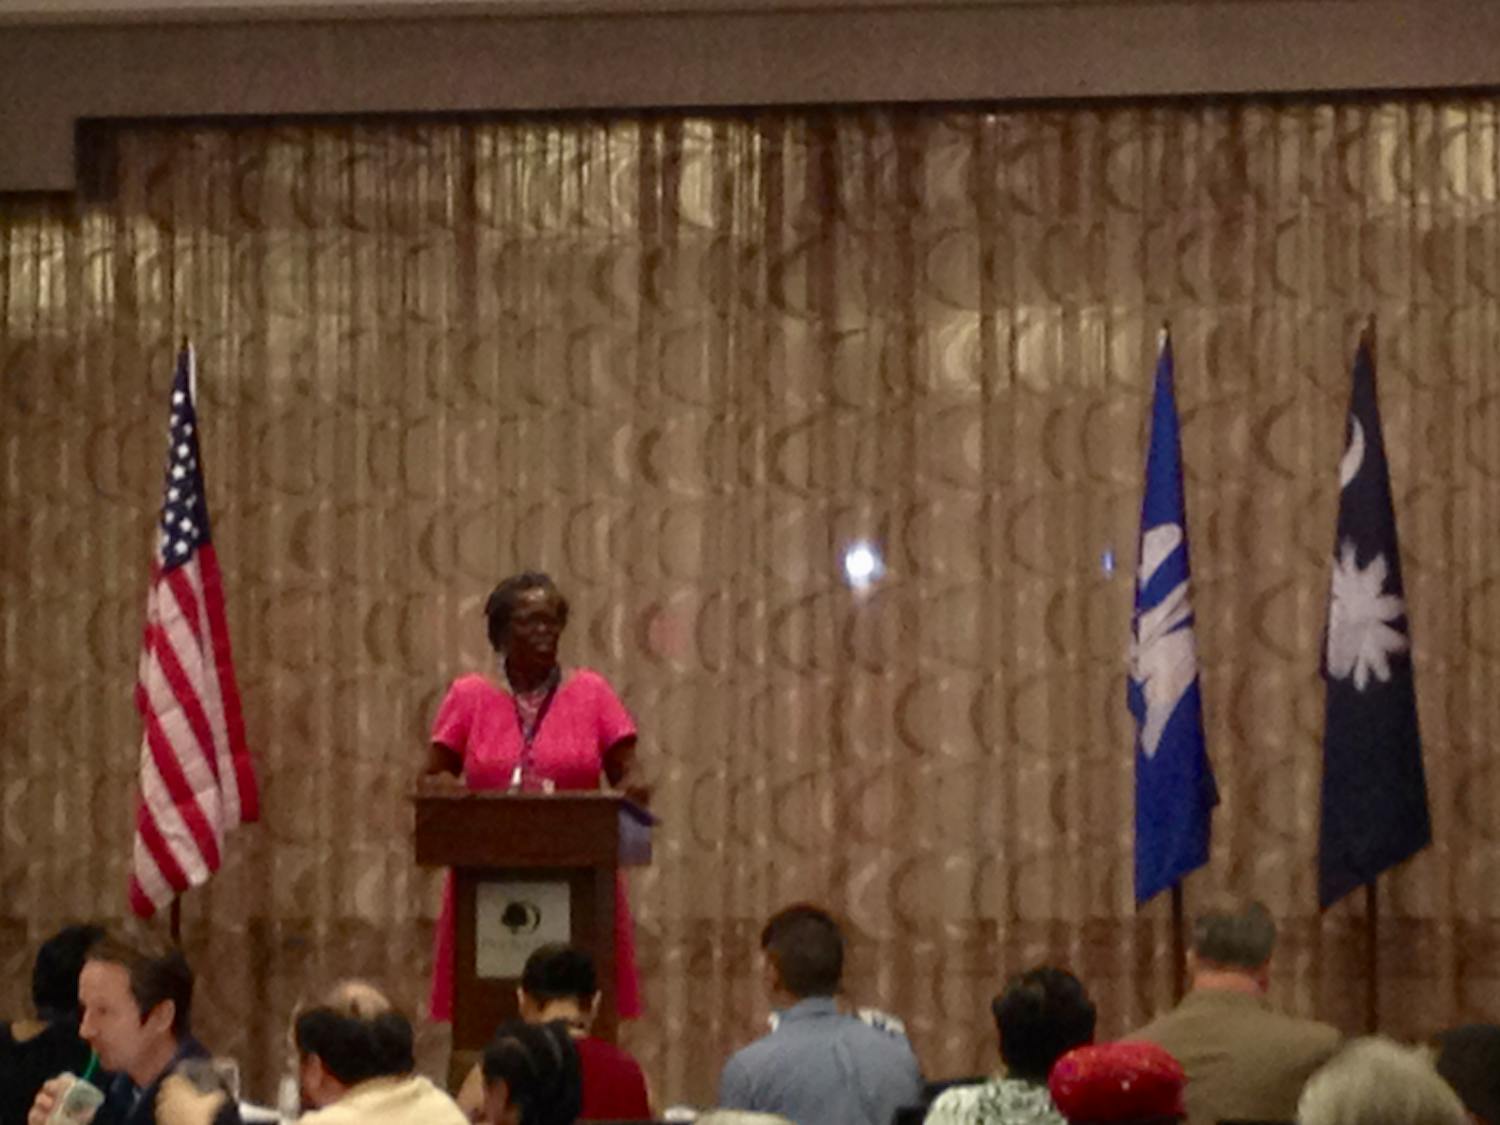 Gilda Cobb-Hunter, DNC Southern Caucus chairwoman and South Carolina State Representative, addresses the South Carolina delegation breakfast at the Democratic National Convention in Philadelphia on July 26, 2016.